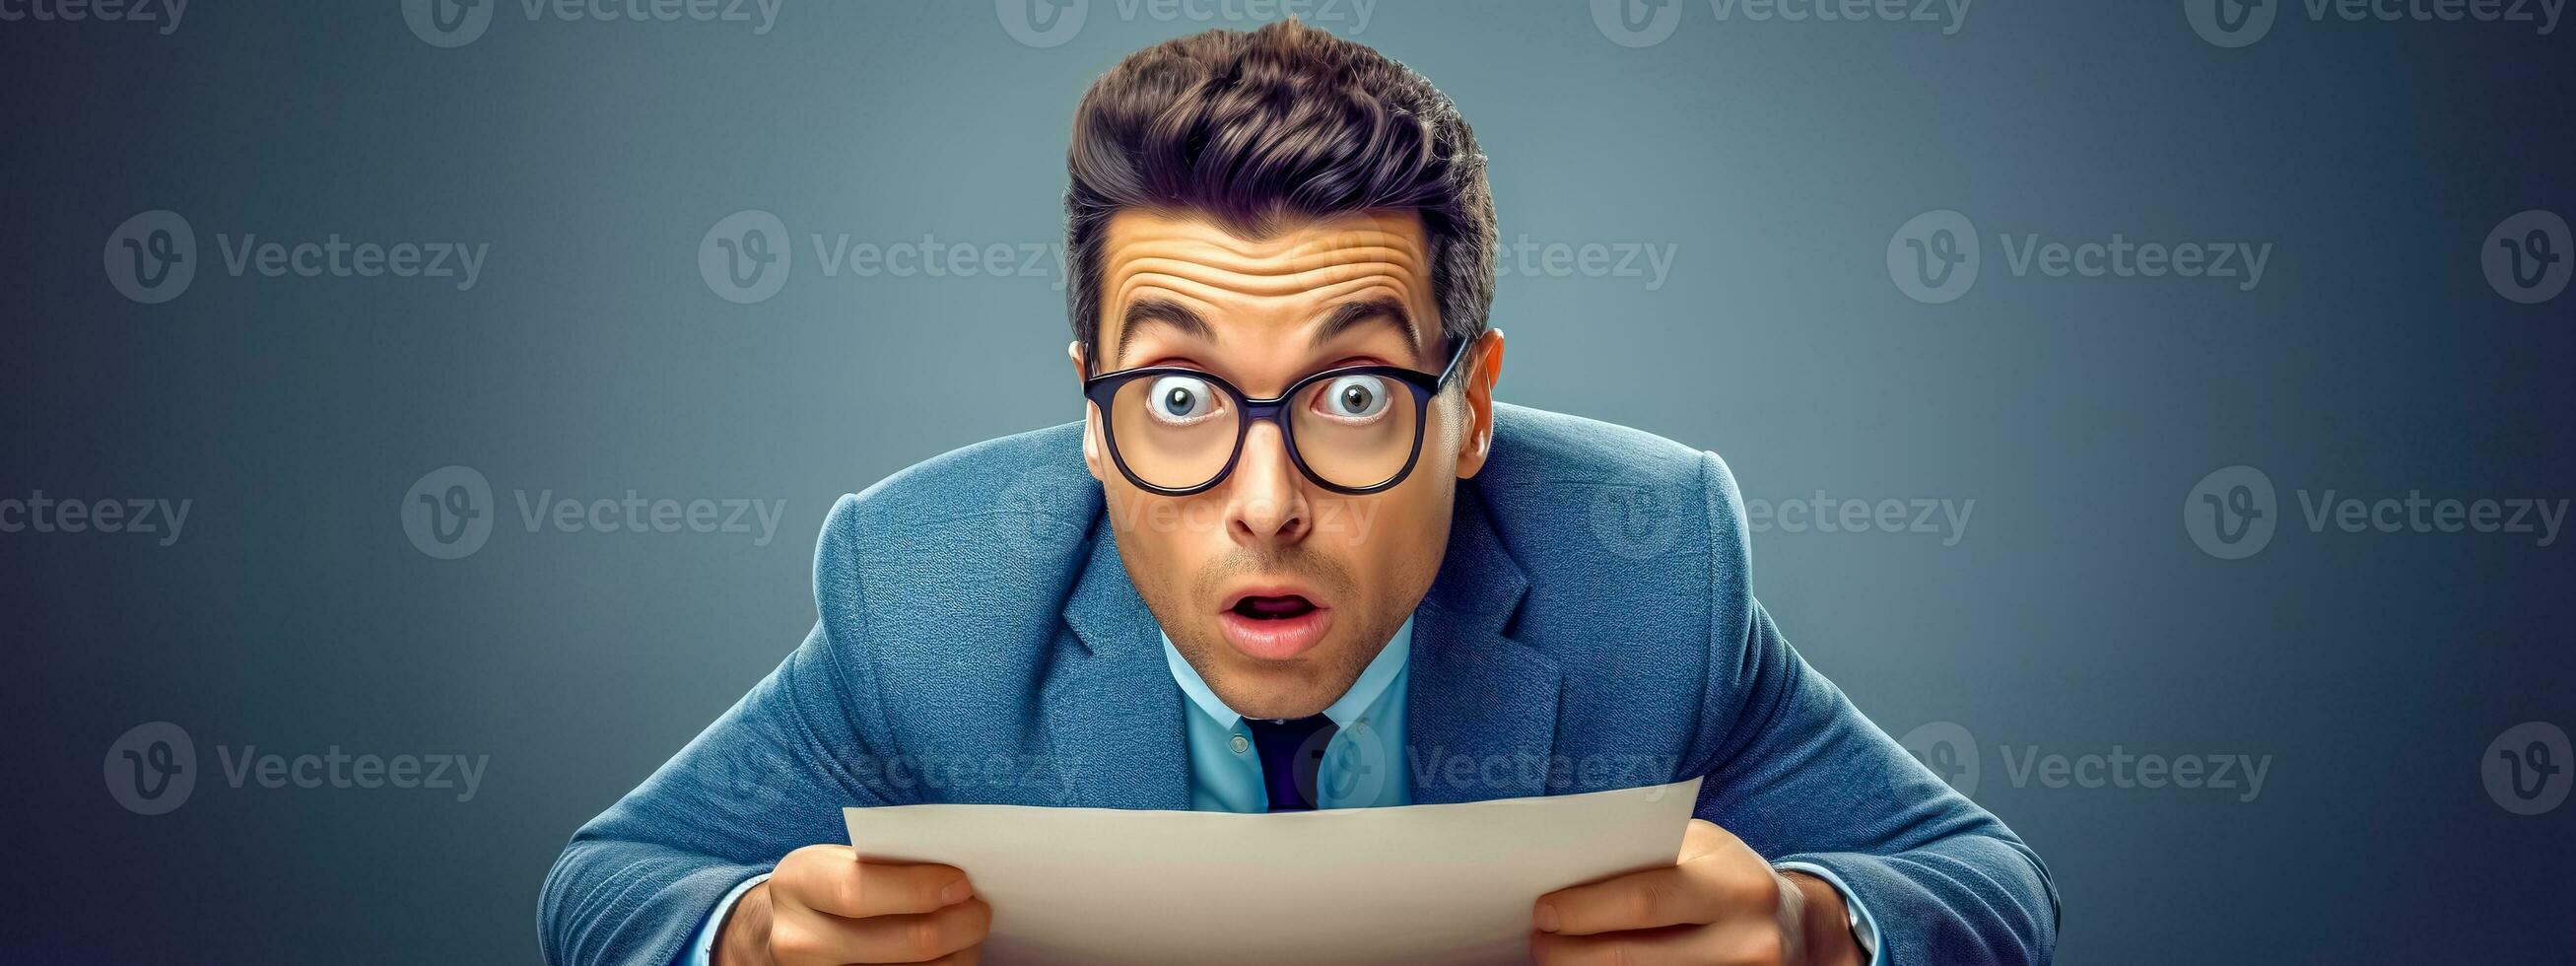 AI Generated person with a startled expression, holding and looking at a document, with eyes wide open and mouth agape, suggesting surprise or shock at the content photo